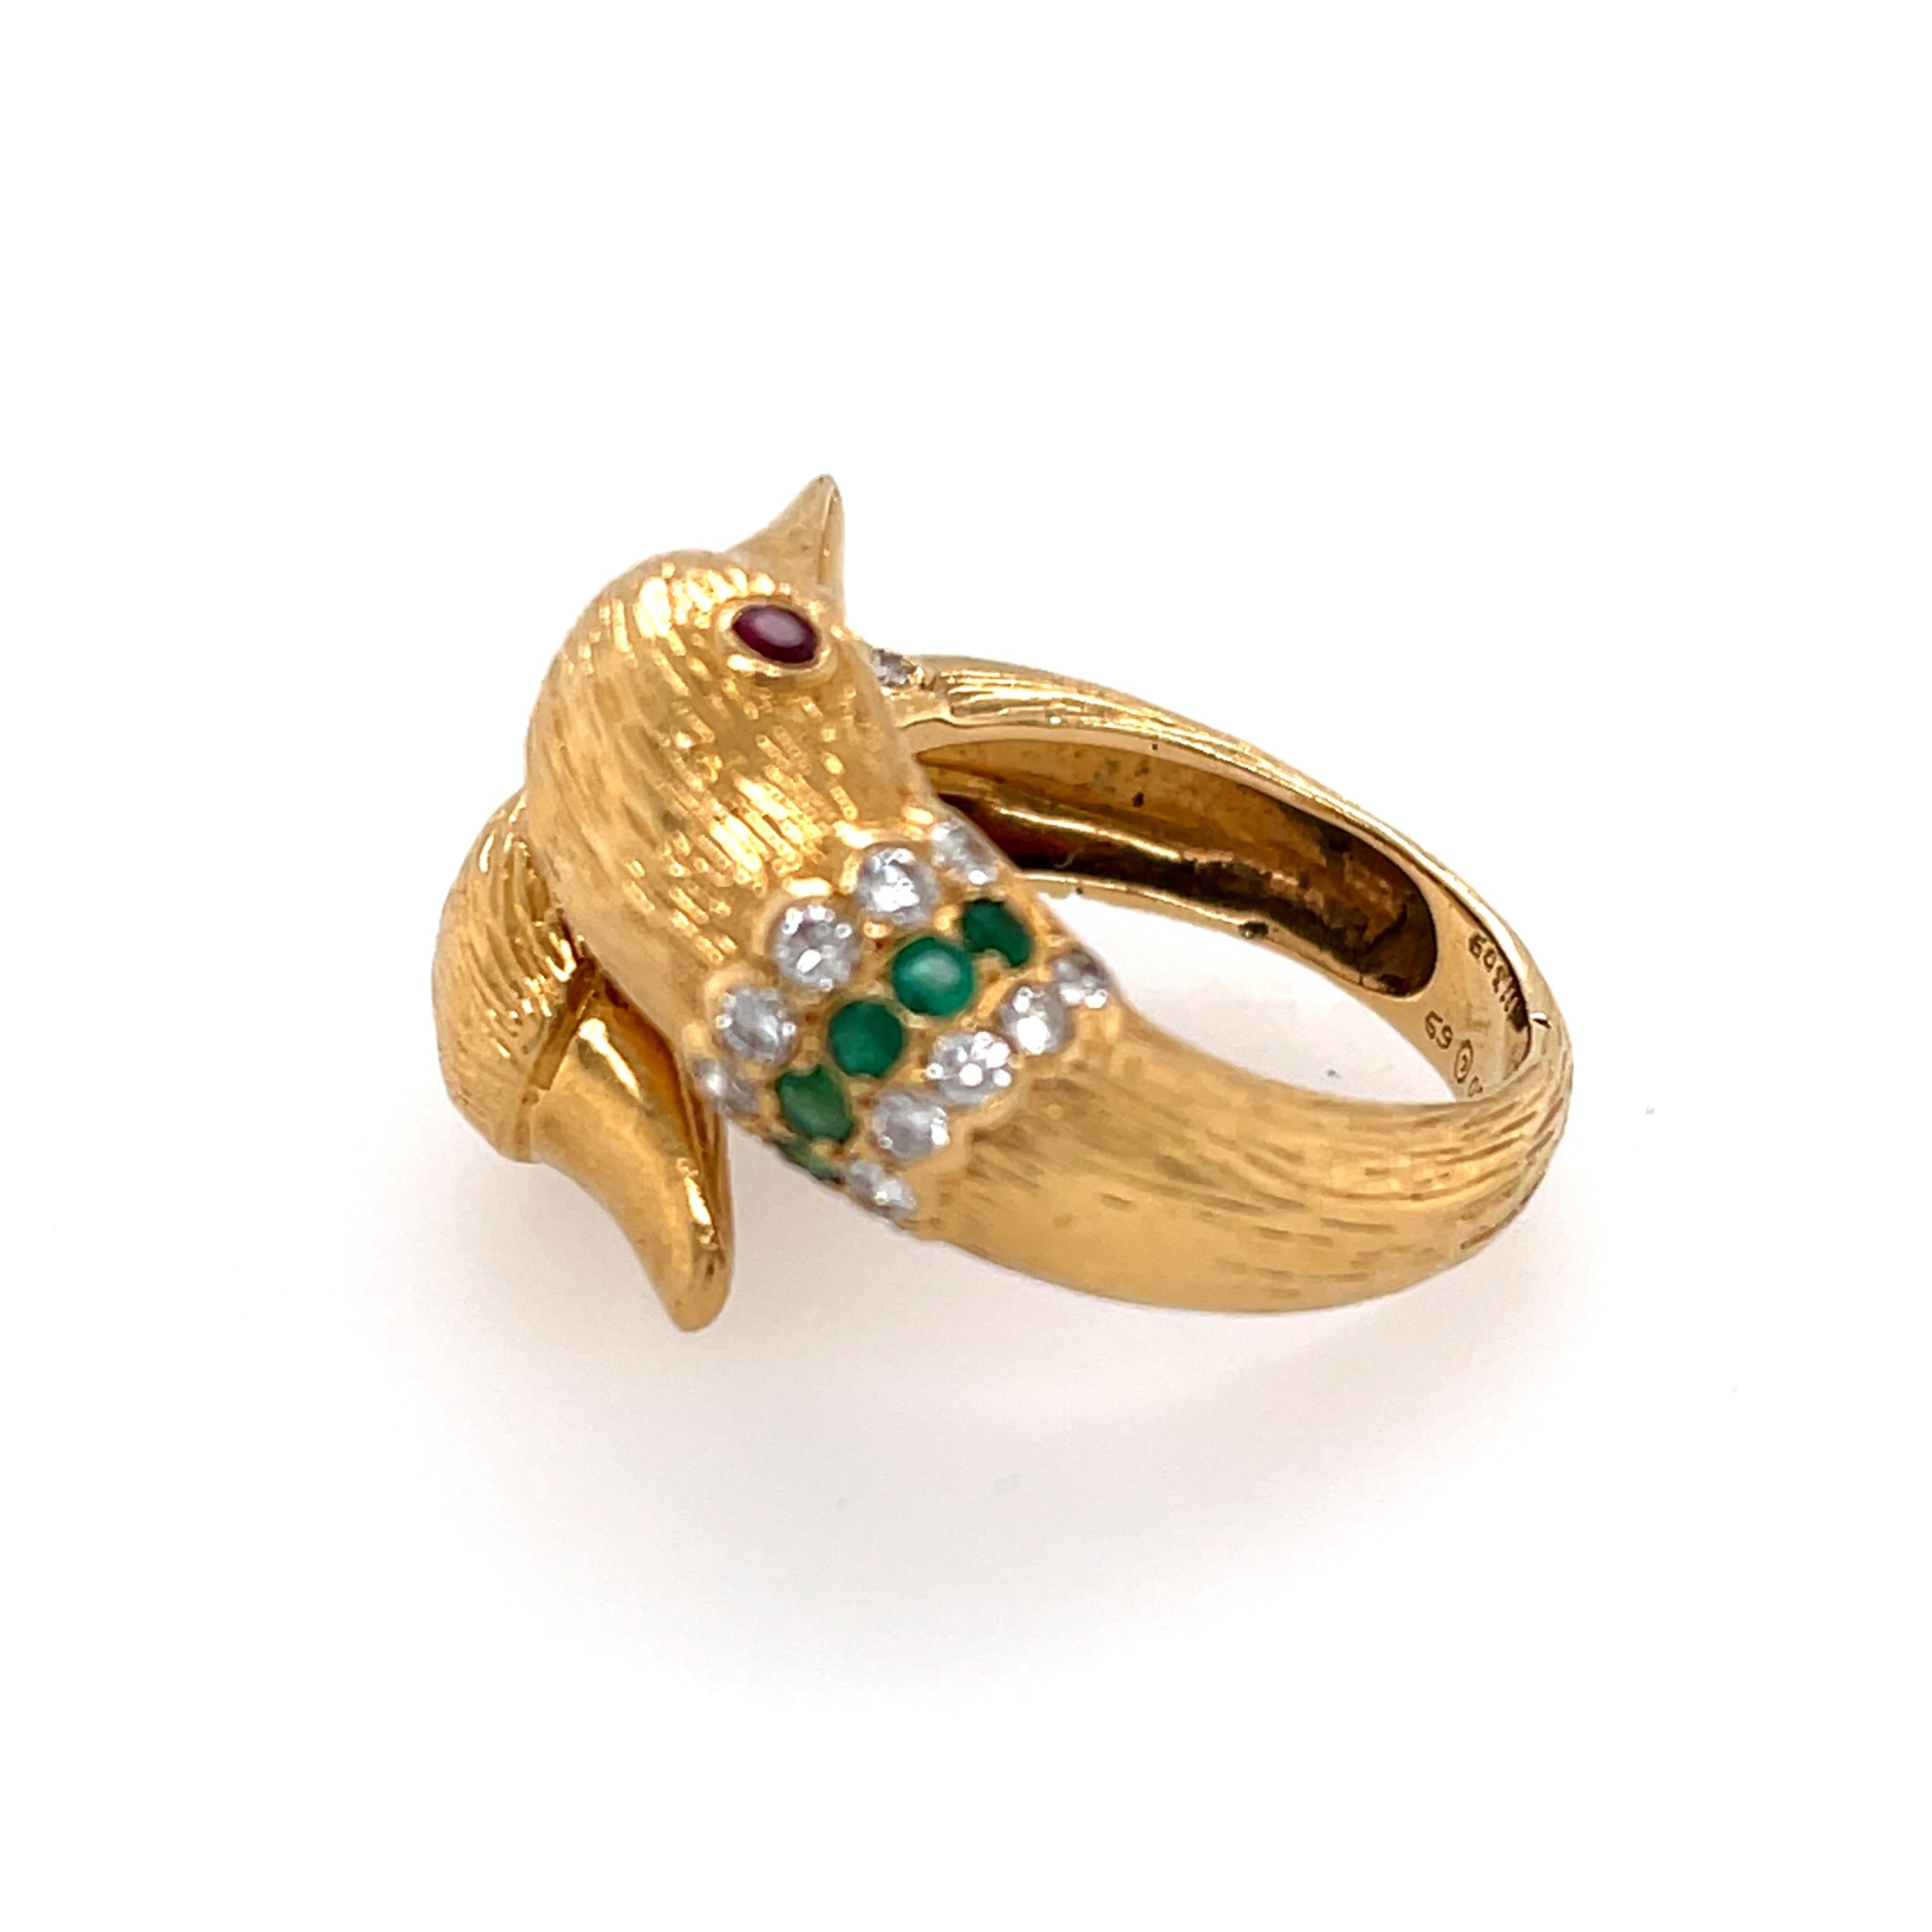 A fine vintage 18k yellow gold emerald and diamond bypass ring made by Van Cleef & Arpels circa 1970. This interesting ring has two duck heads with ruby eyes. We have seen this model made in fluted coral as well. This is the all gold version. The